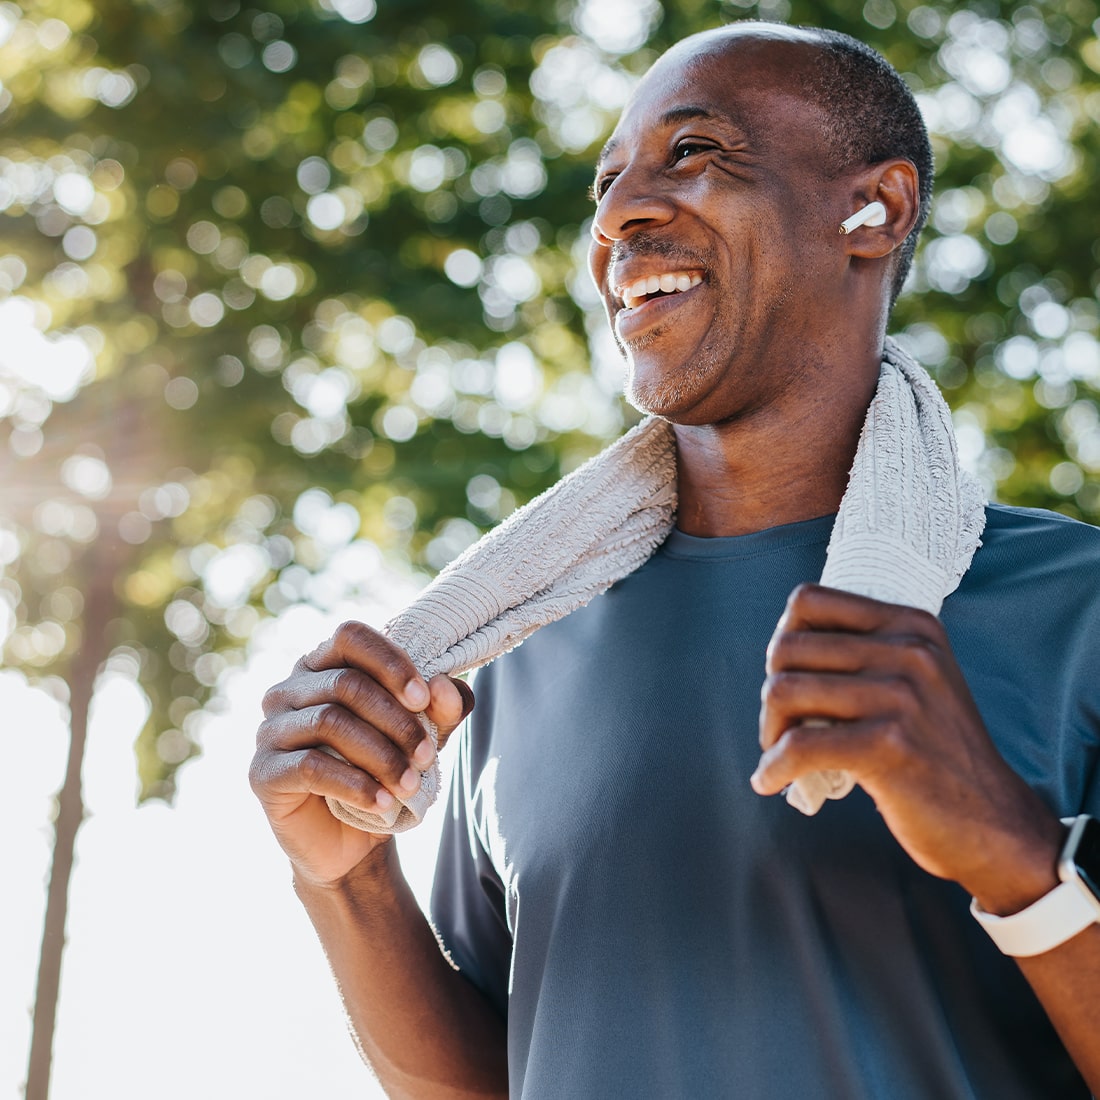 Man smiling outdoors in the sun after a workout.